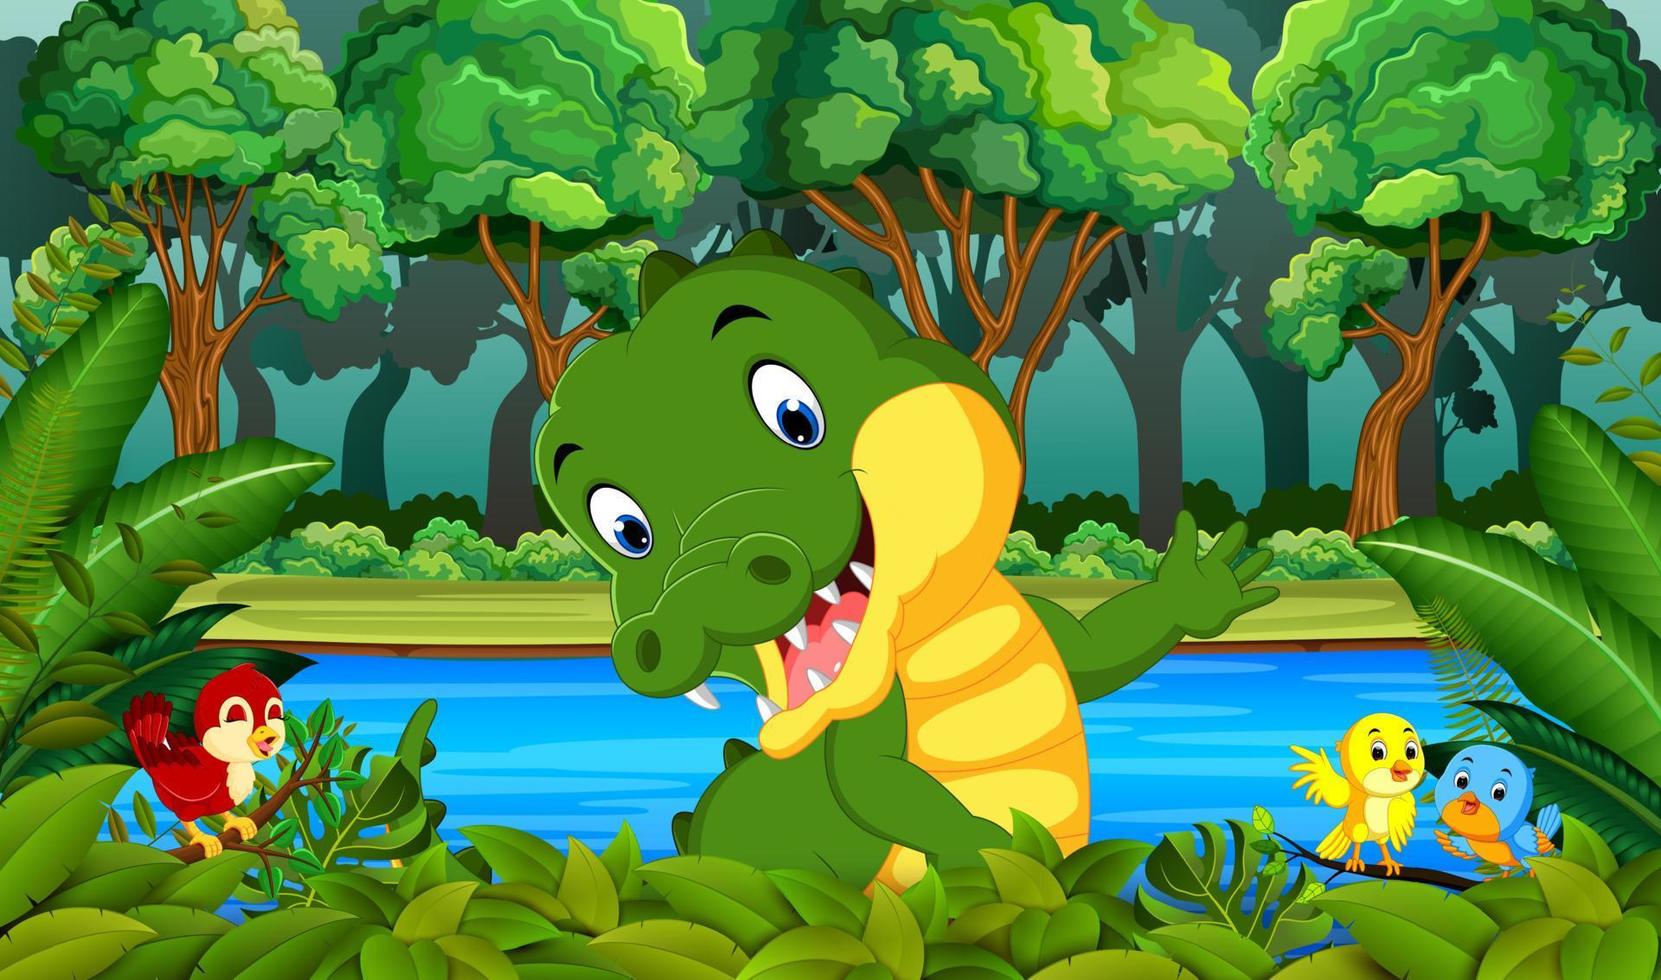 Crocodile in the forest vector